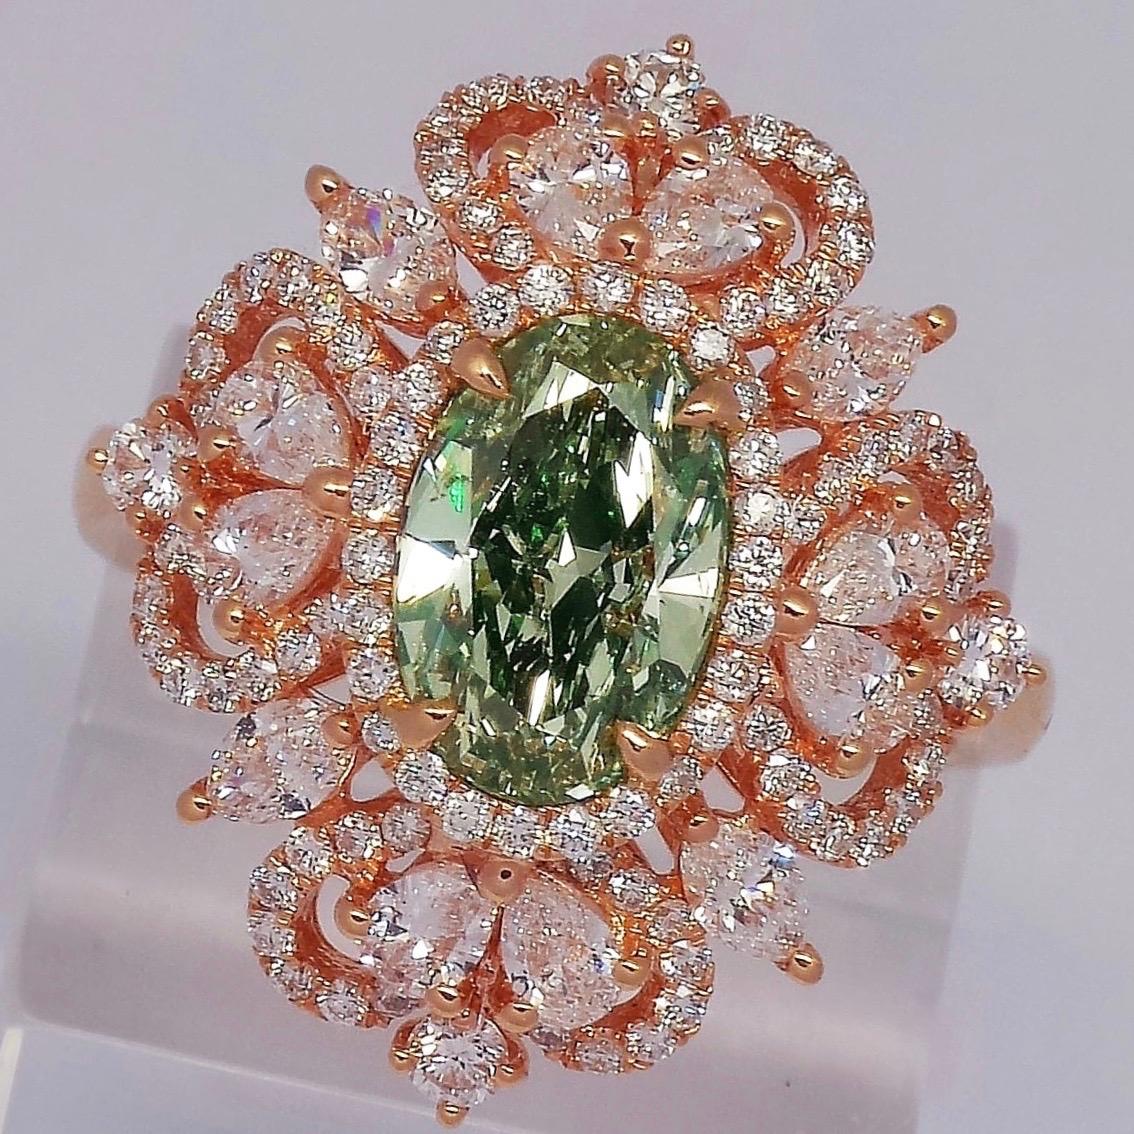 From the Emilio Jewelry Museum Vault, We are Showcasing a stunning 1.75 carat center Gia Certified natural fancy 